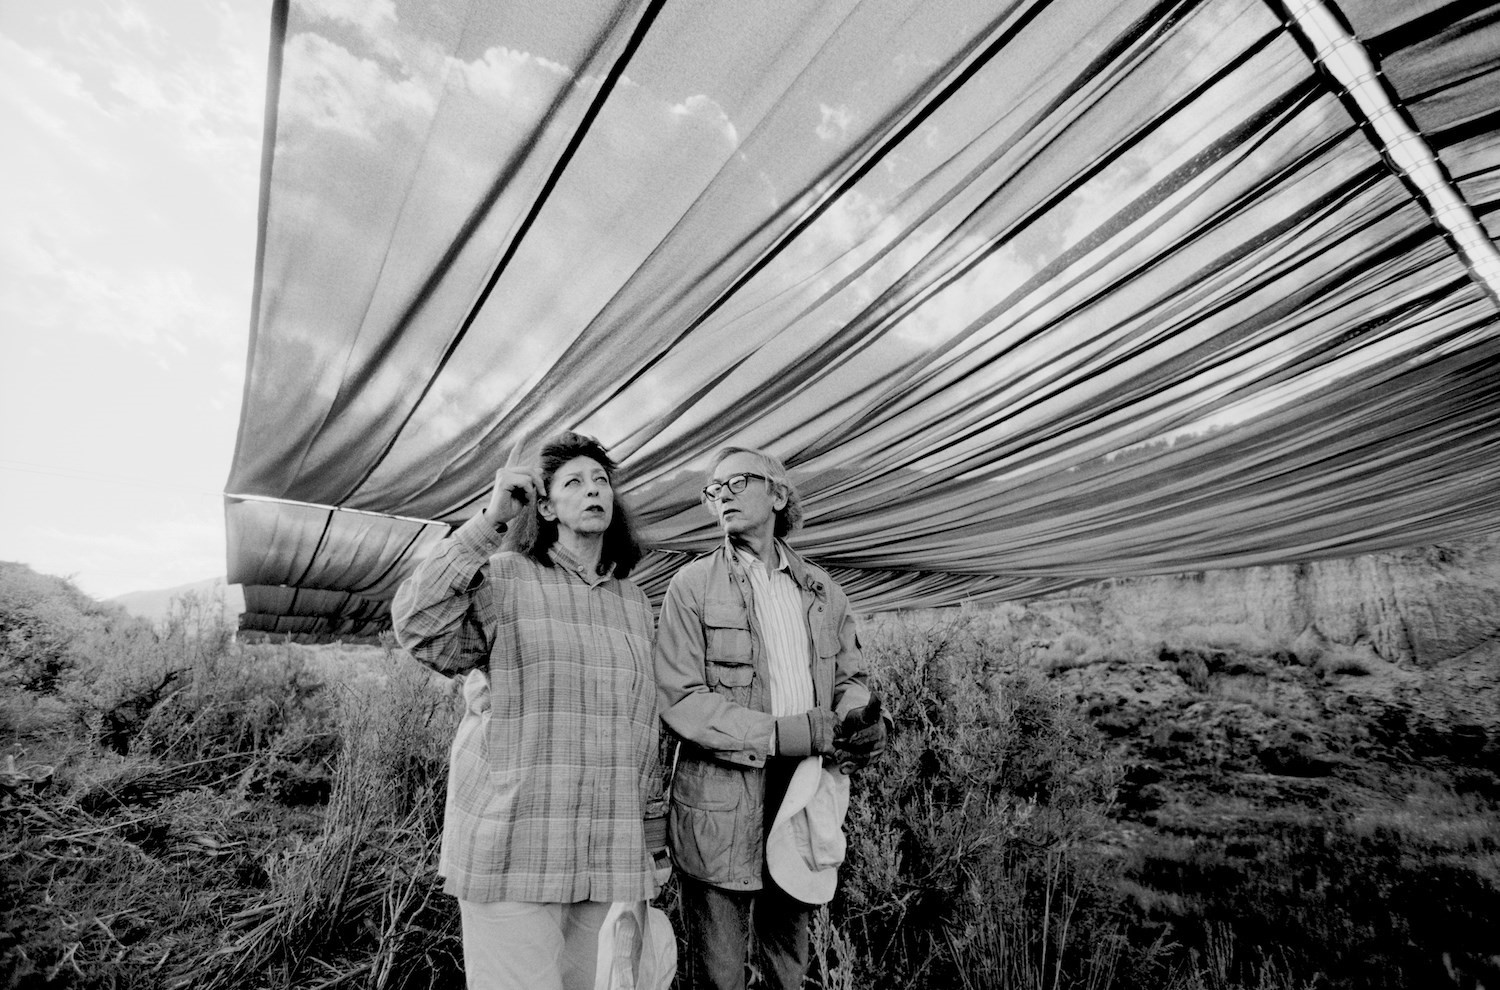 Over The River - Christo and Jeanne-Claude during 